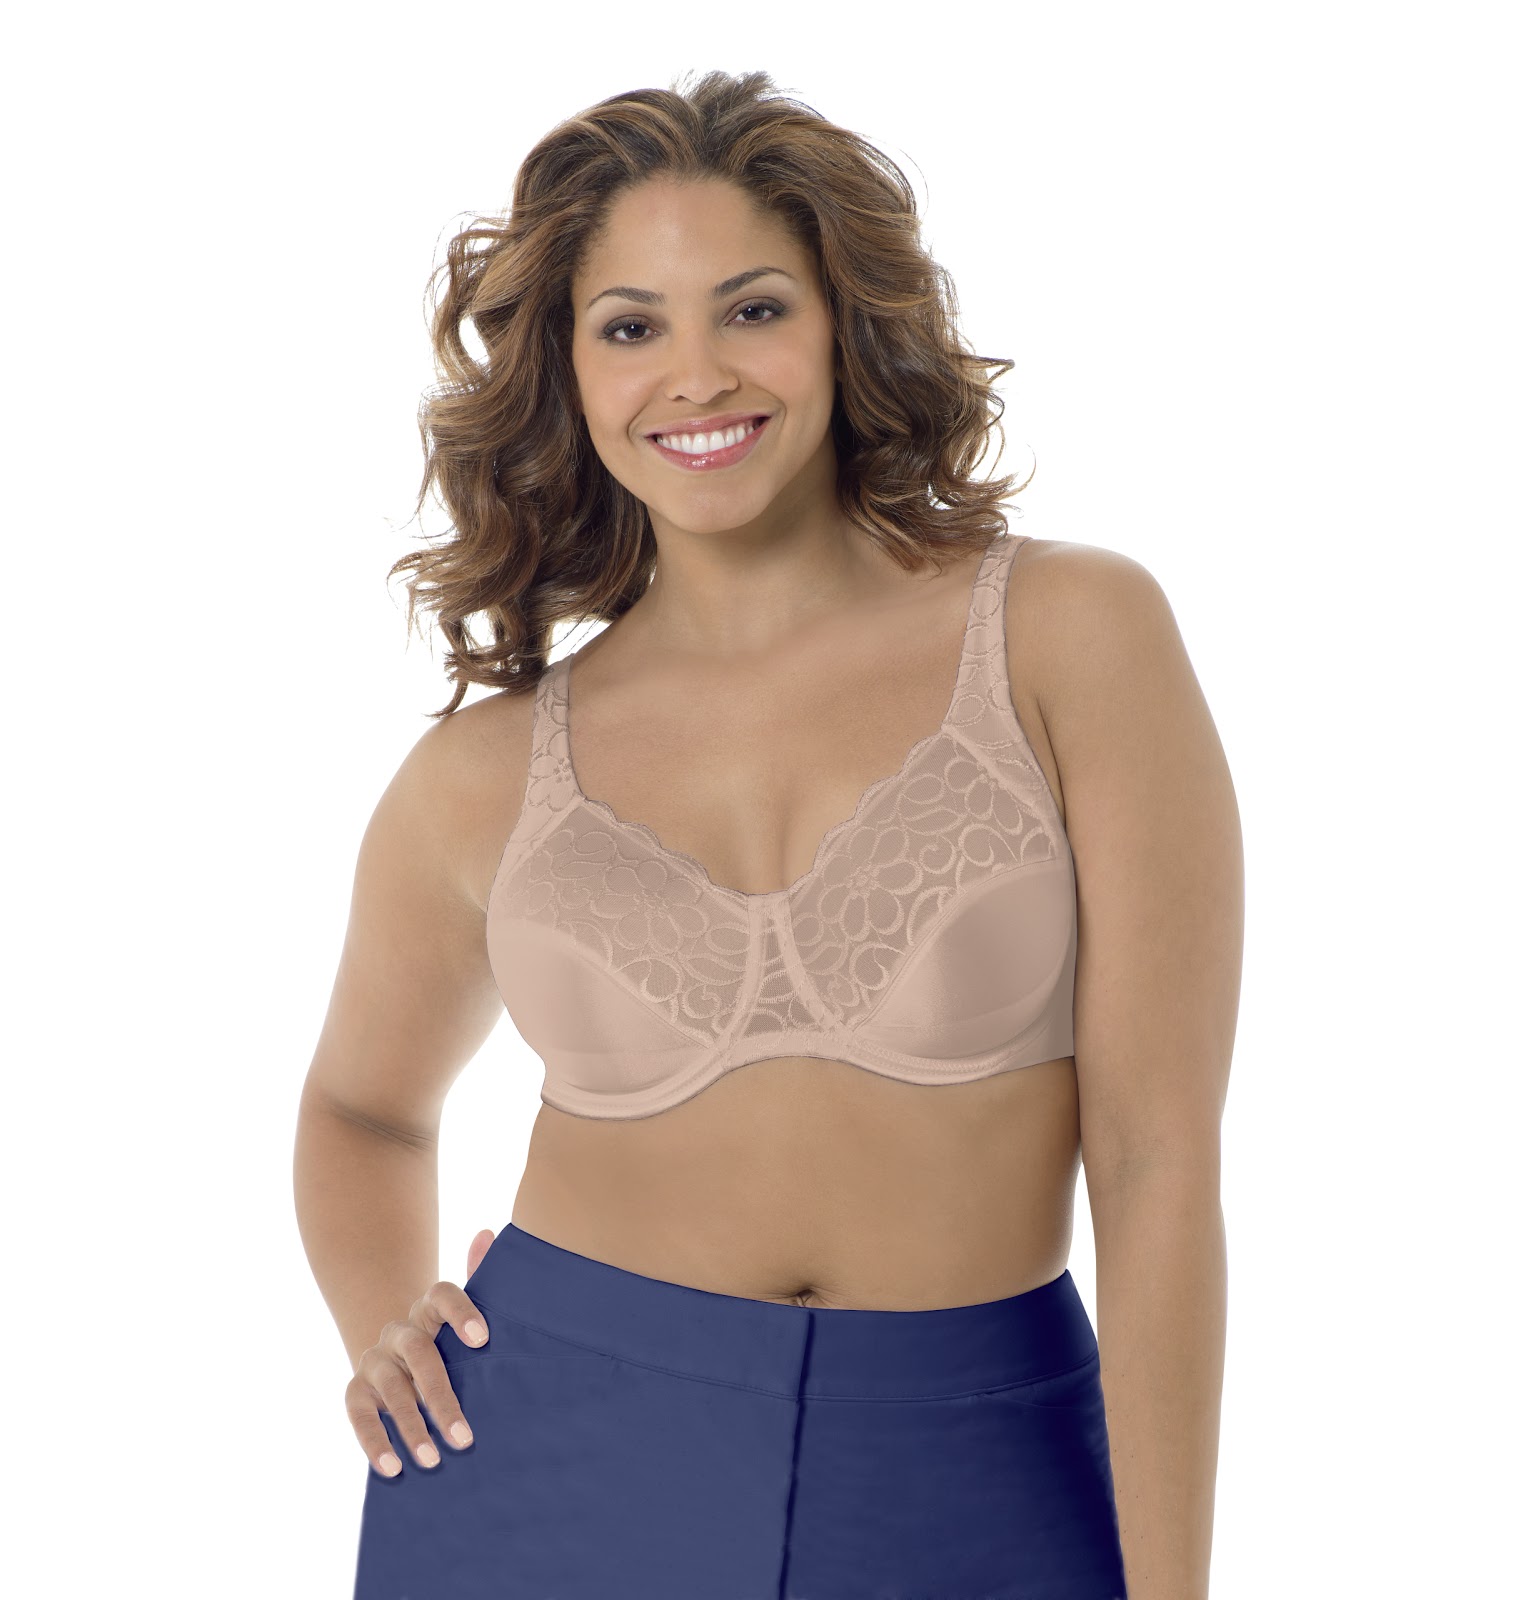 PLAYTEX ELEGANT UPLIFT AND SUPPORT UNDERWIRE BRA REVIEW AND